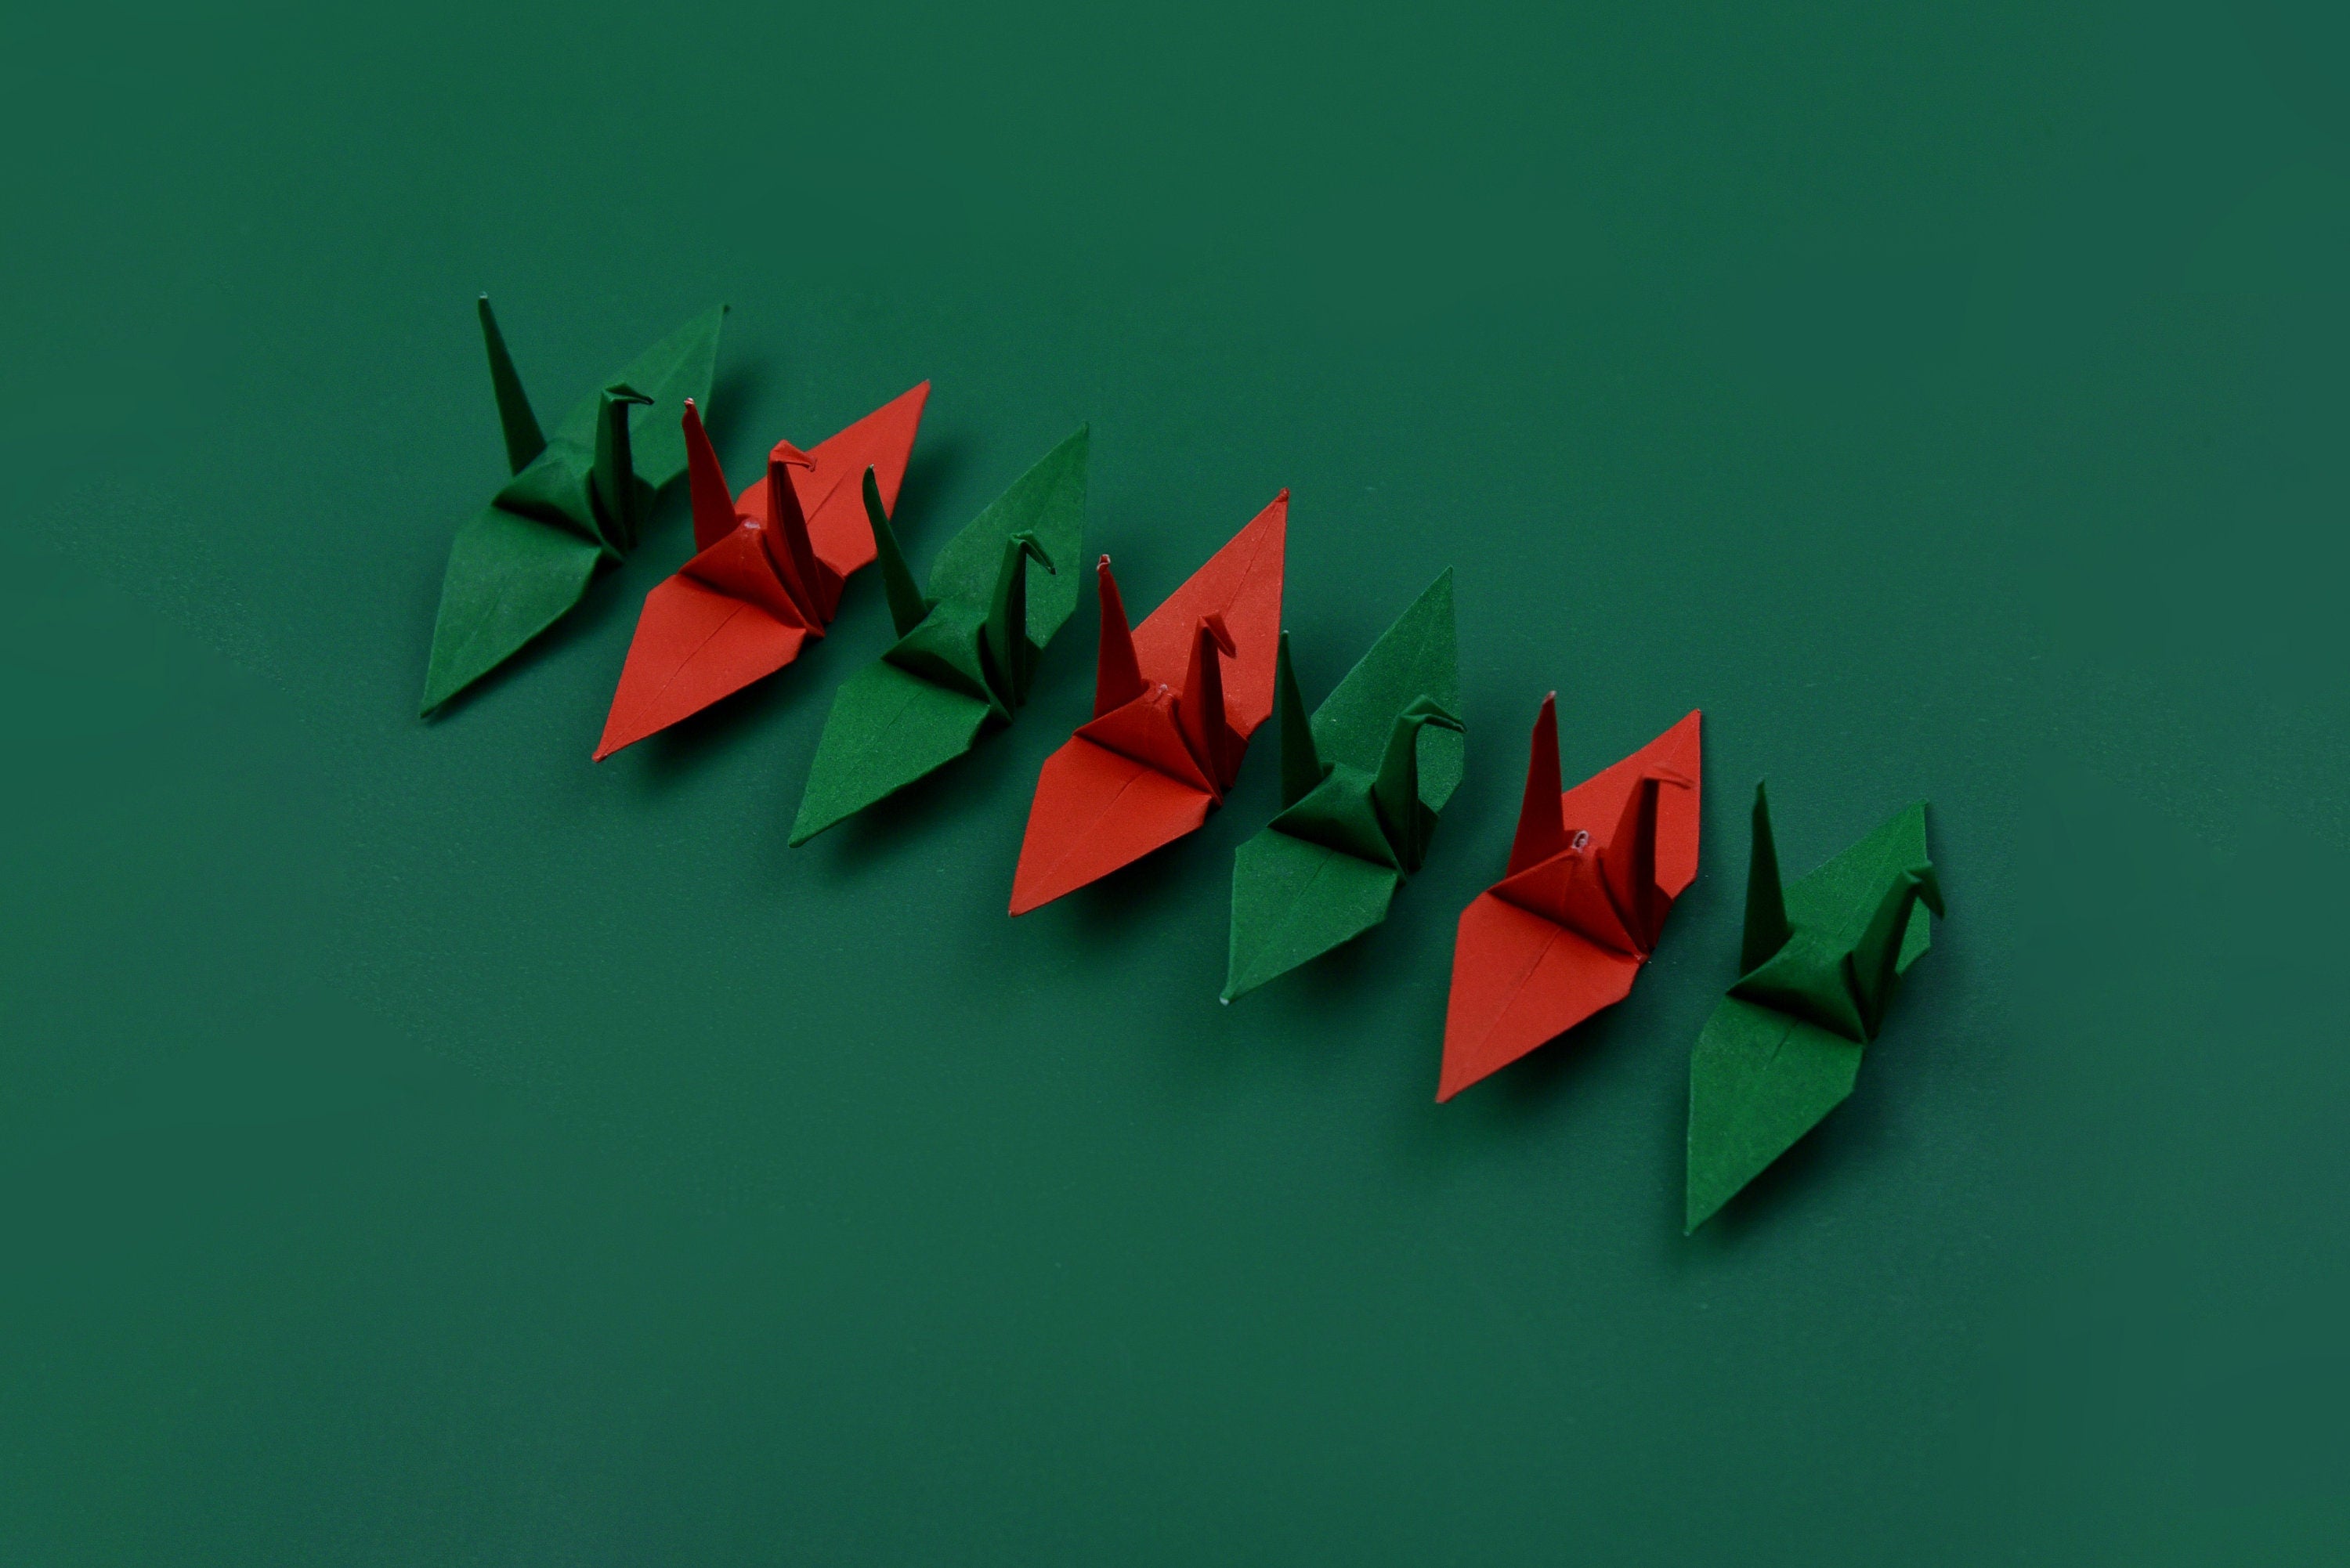 1000 Origami Paper Crane Red Green 3x3 inches (7.5 cm) Origami crane Ornament, Wedding Gift, Christmas